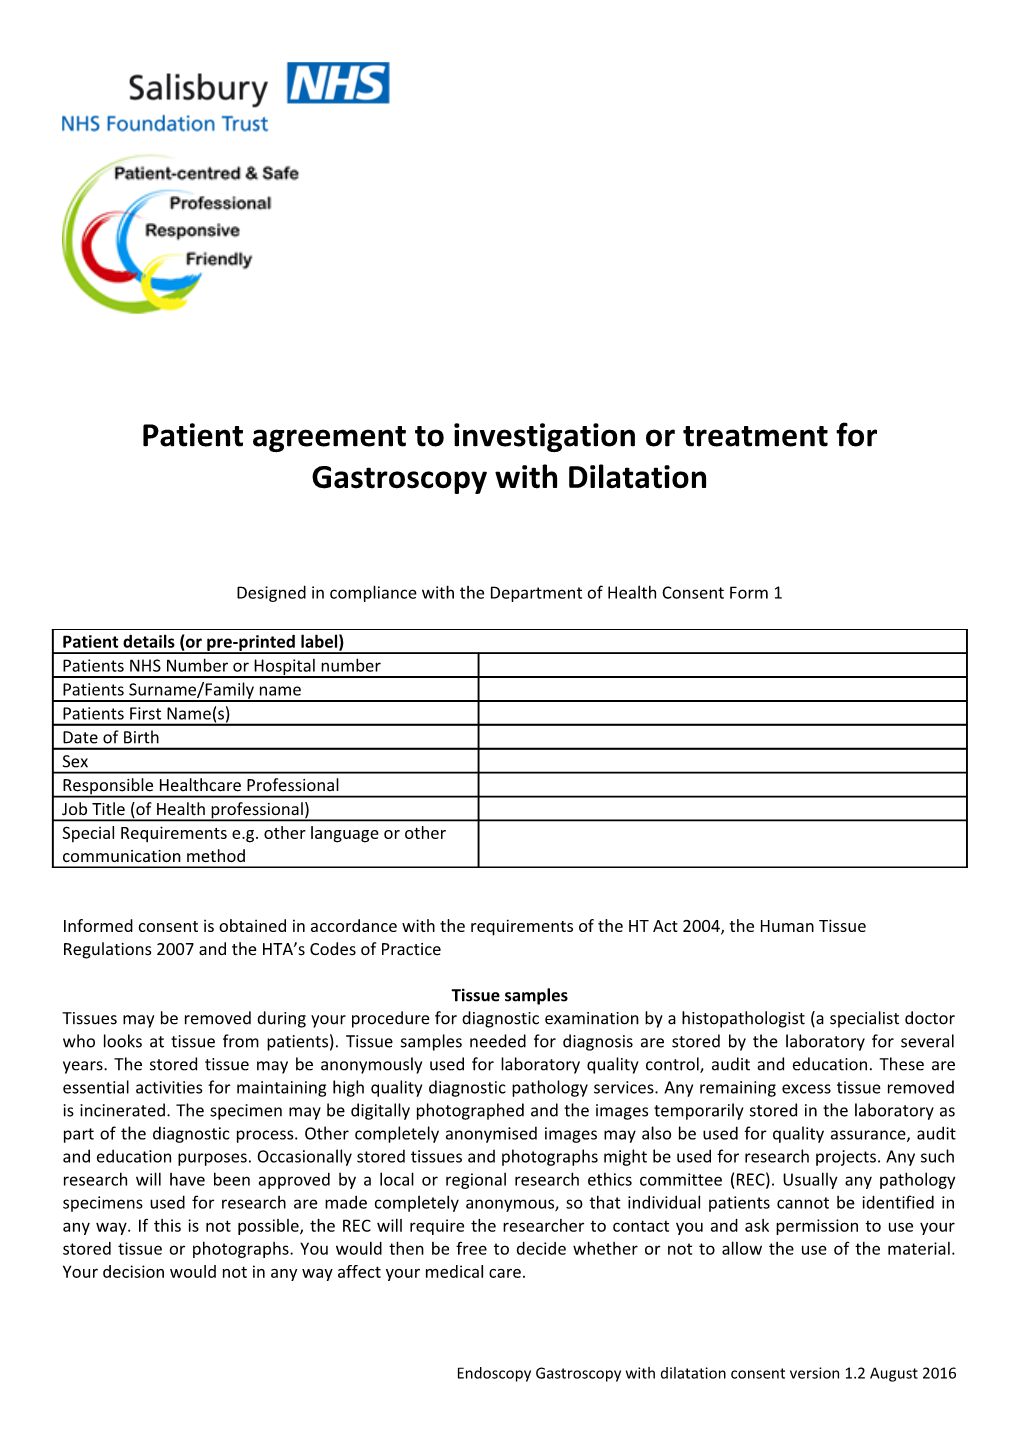 Patient Agreement to Investigation Or Treatment for Gastroscopy with Dilatation